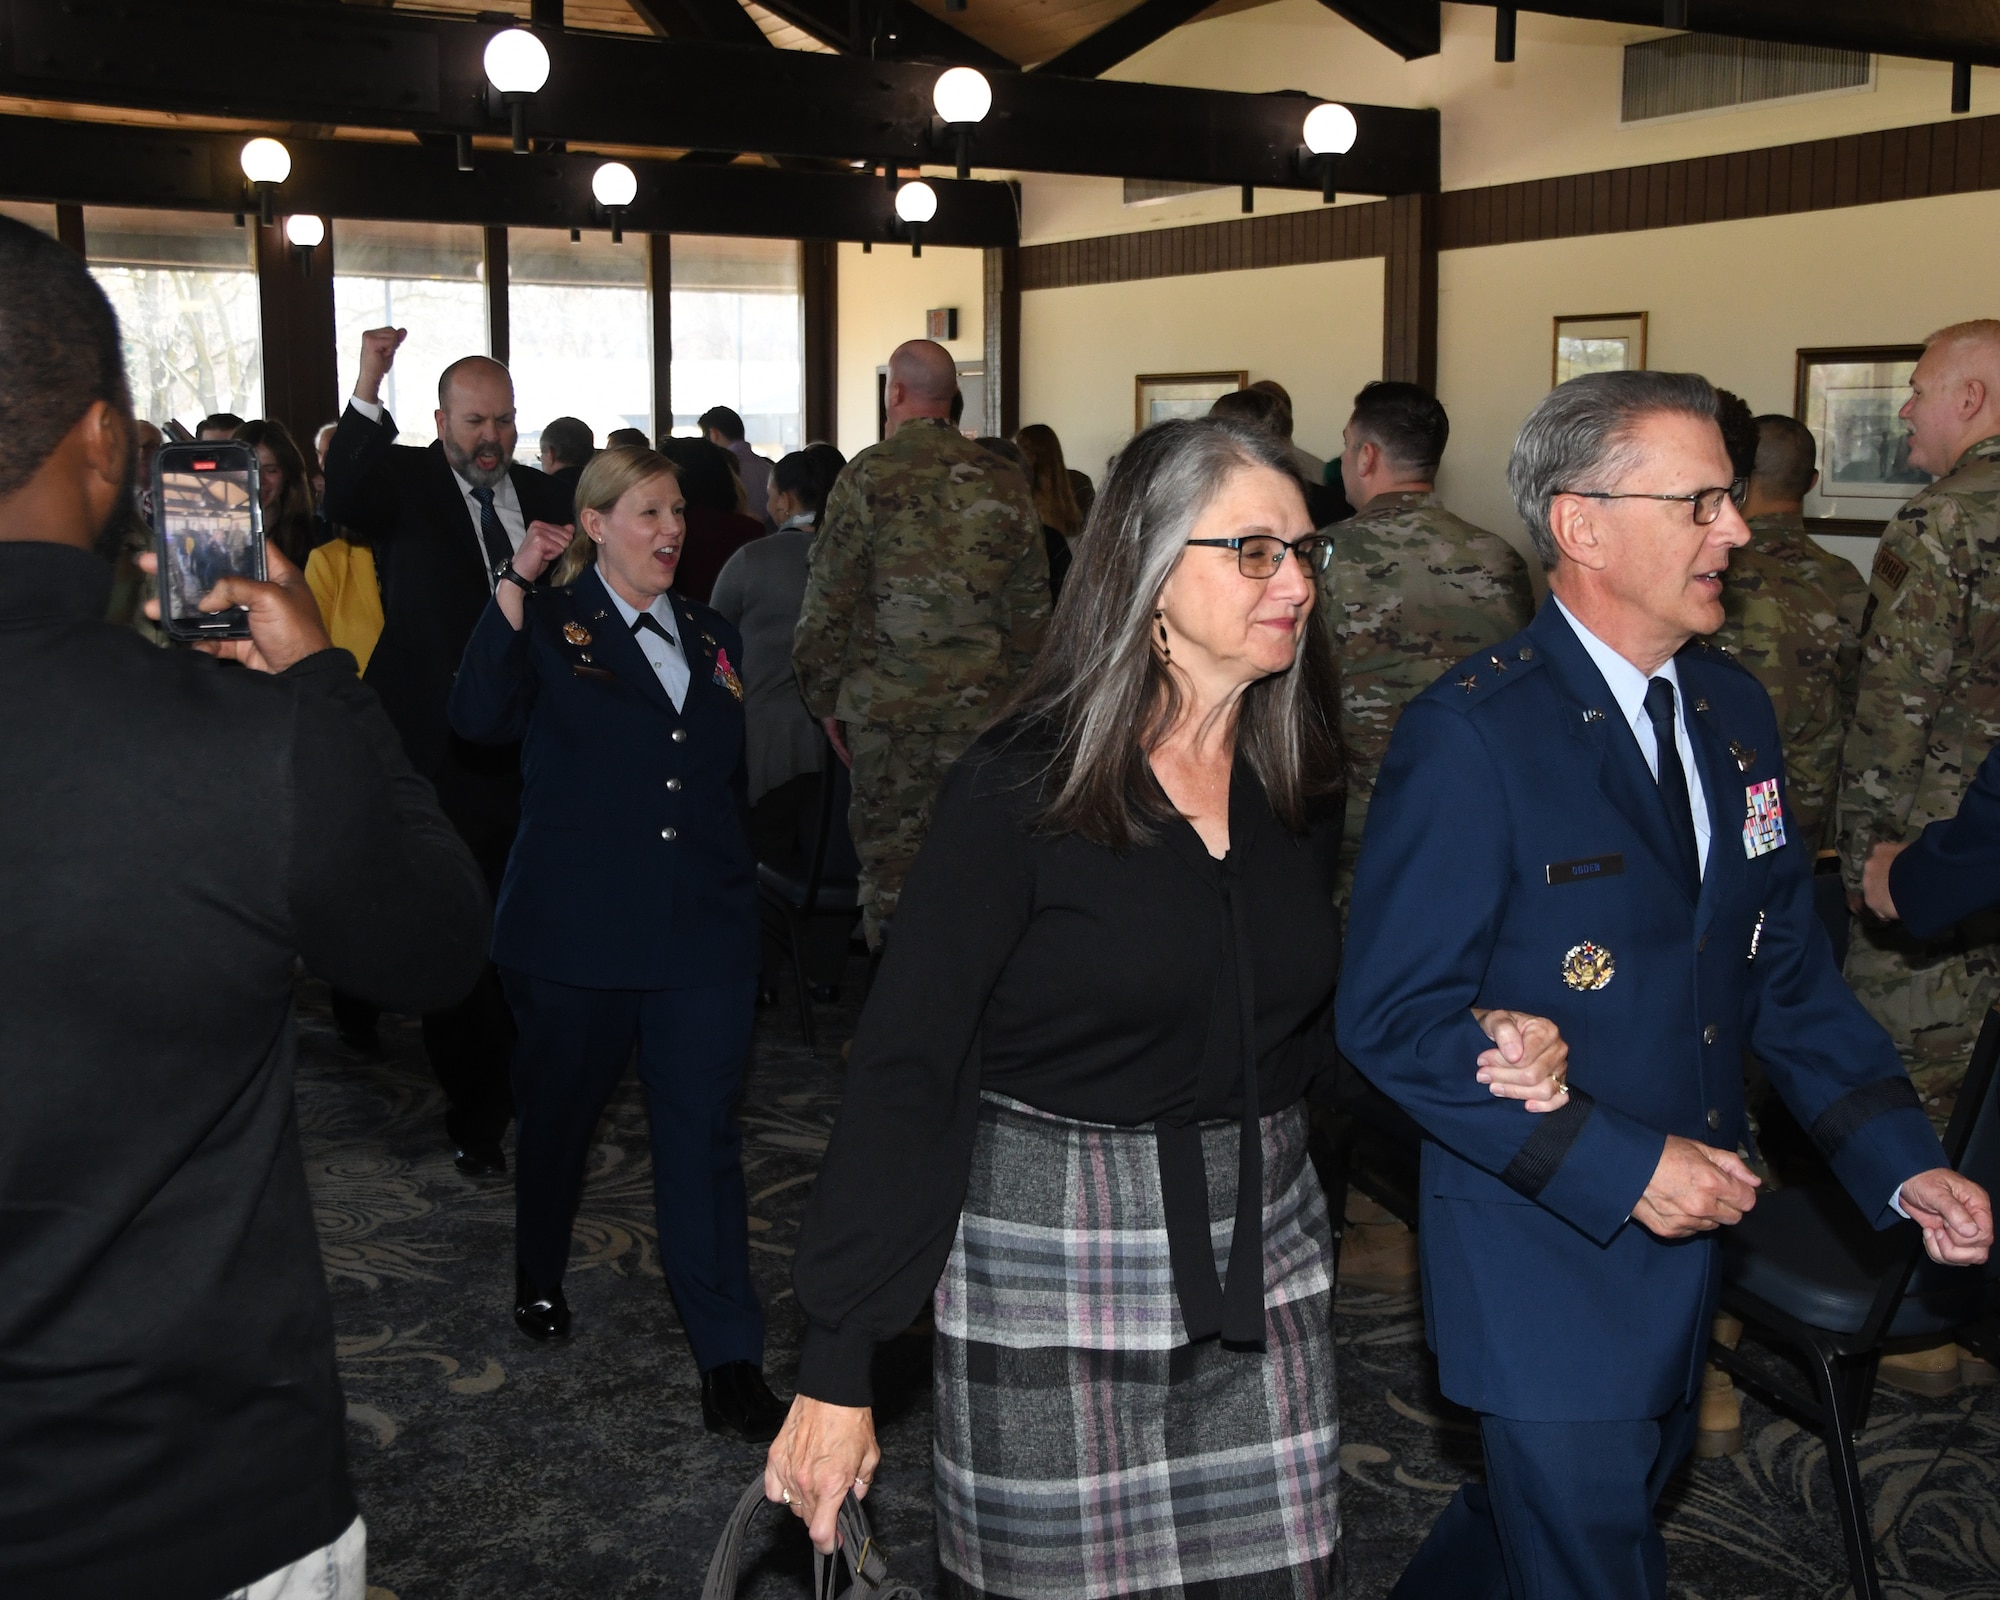 Col. Ann Brown, 459th Mission Support Group Commander, retired from the Air Force March 5, 2023, at Joint Base Andrews, Md. Her retirement ceremony held at The Courses at Andrews caps more than 33 years of honorable, decorated service.